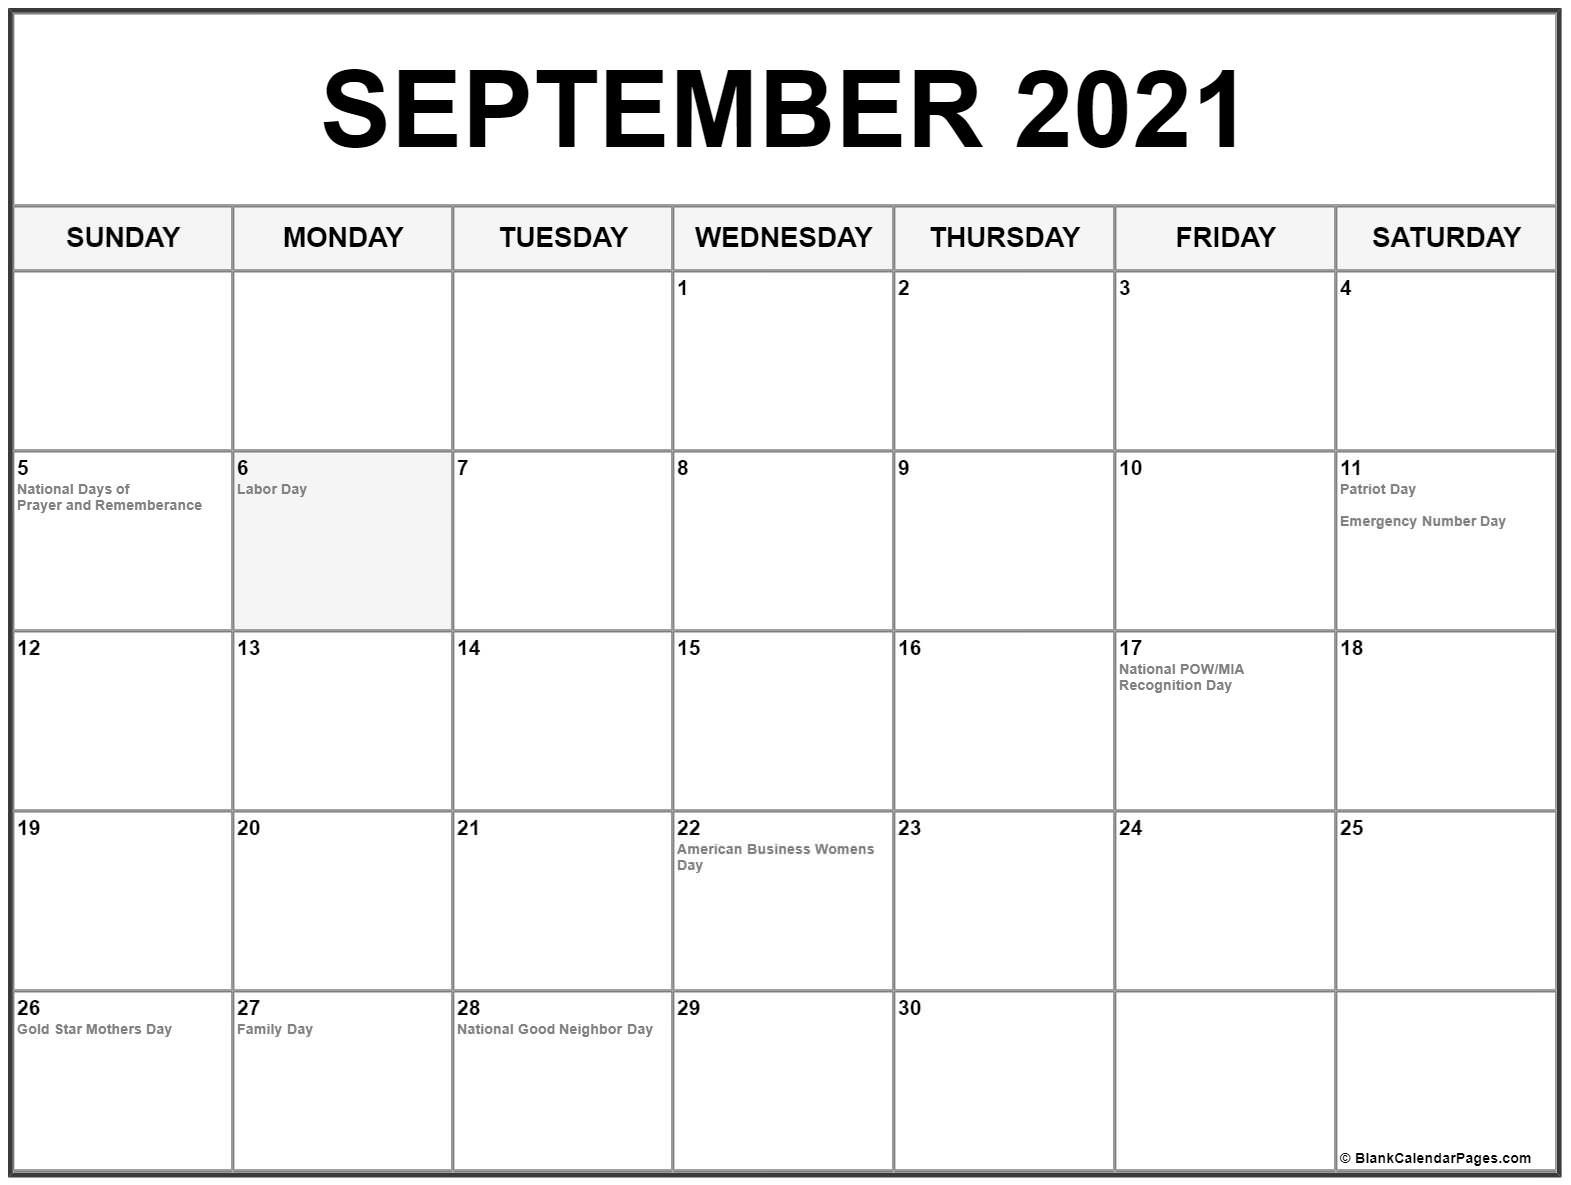 Collection Of September 2021 Calendars With Holidays Us Calendar Holidays 2021